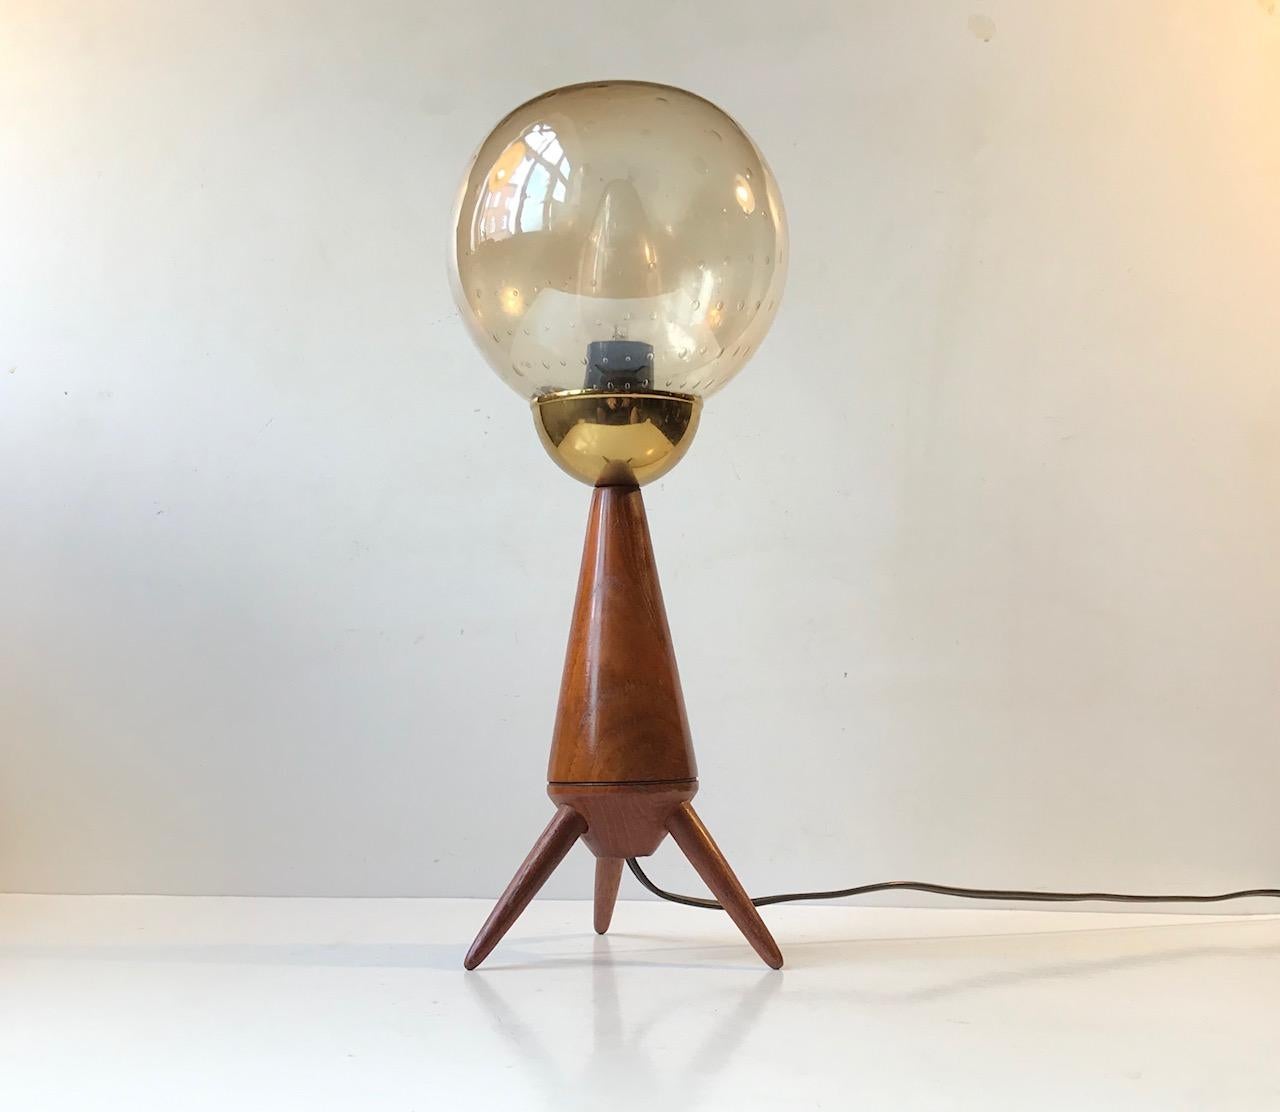 Shaped as a Satellite or Lunar Landing vehicle this unusual table light made from solid teak, brass and handblown bubble glass demands attention. Made/designed anonymously in Scandinavia during the 1960s. Stylistically it corresponds with similar